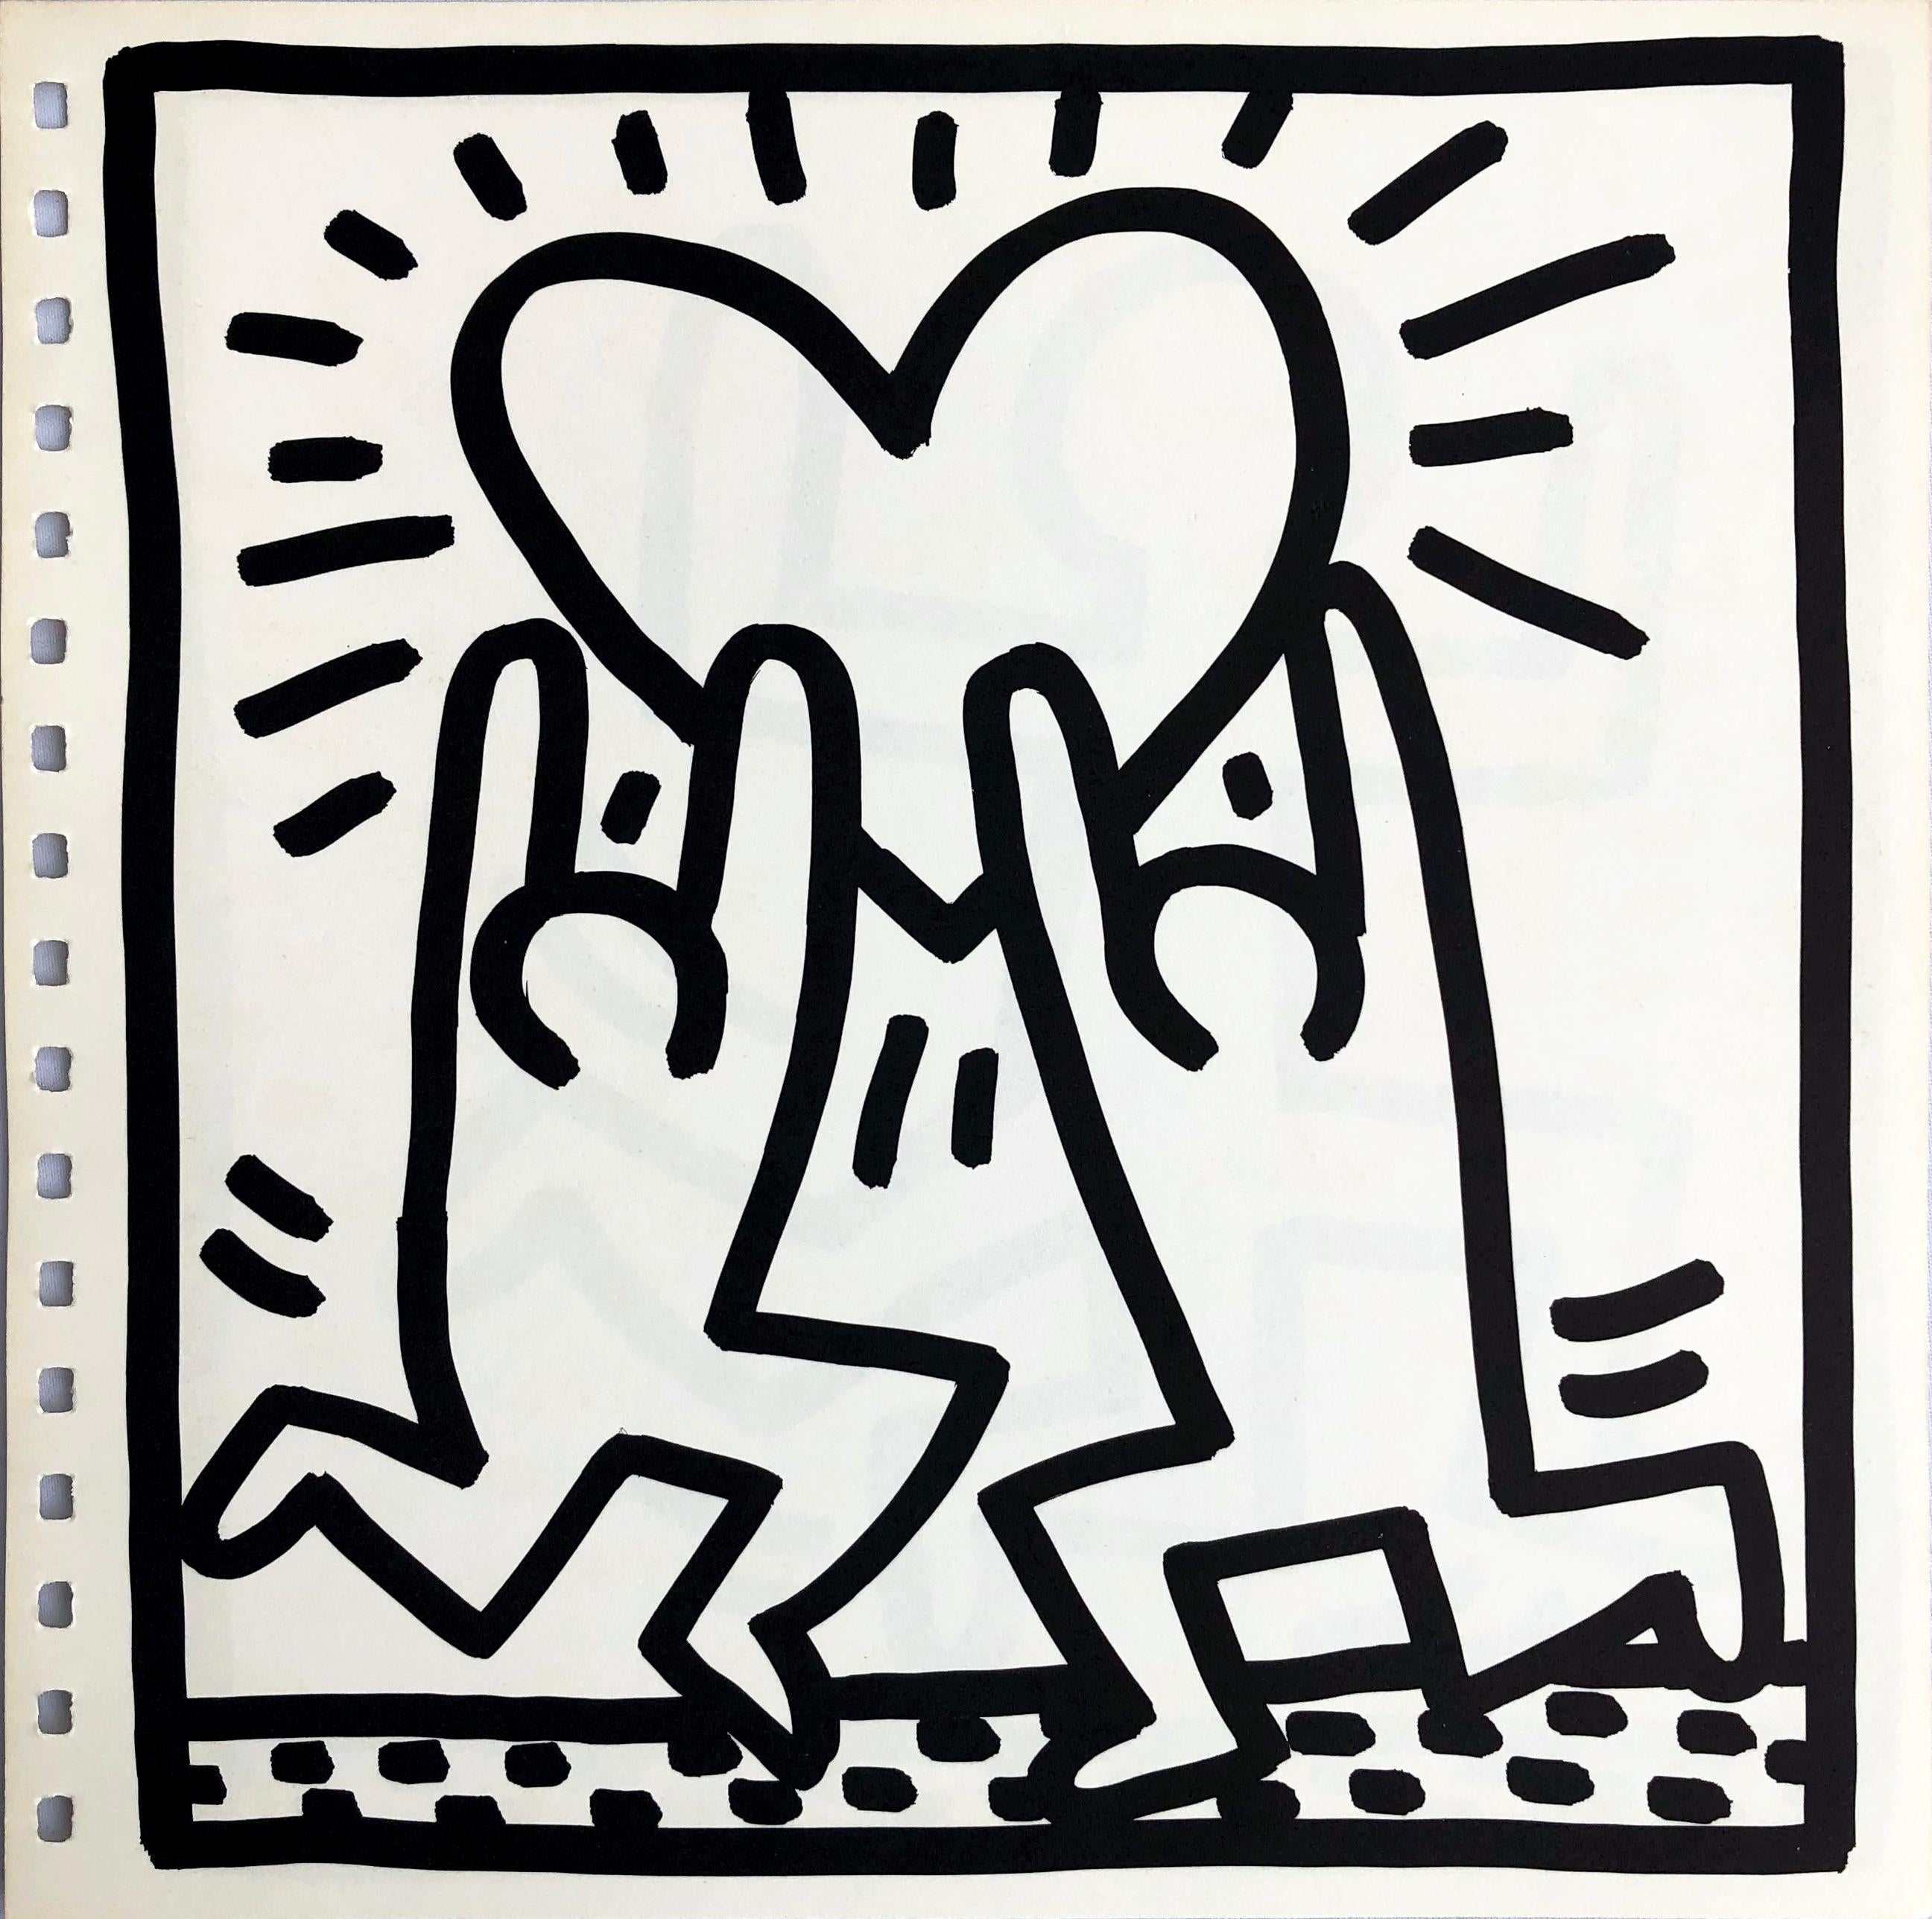 keith haring died